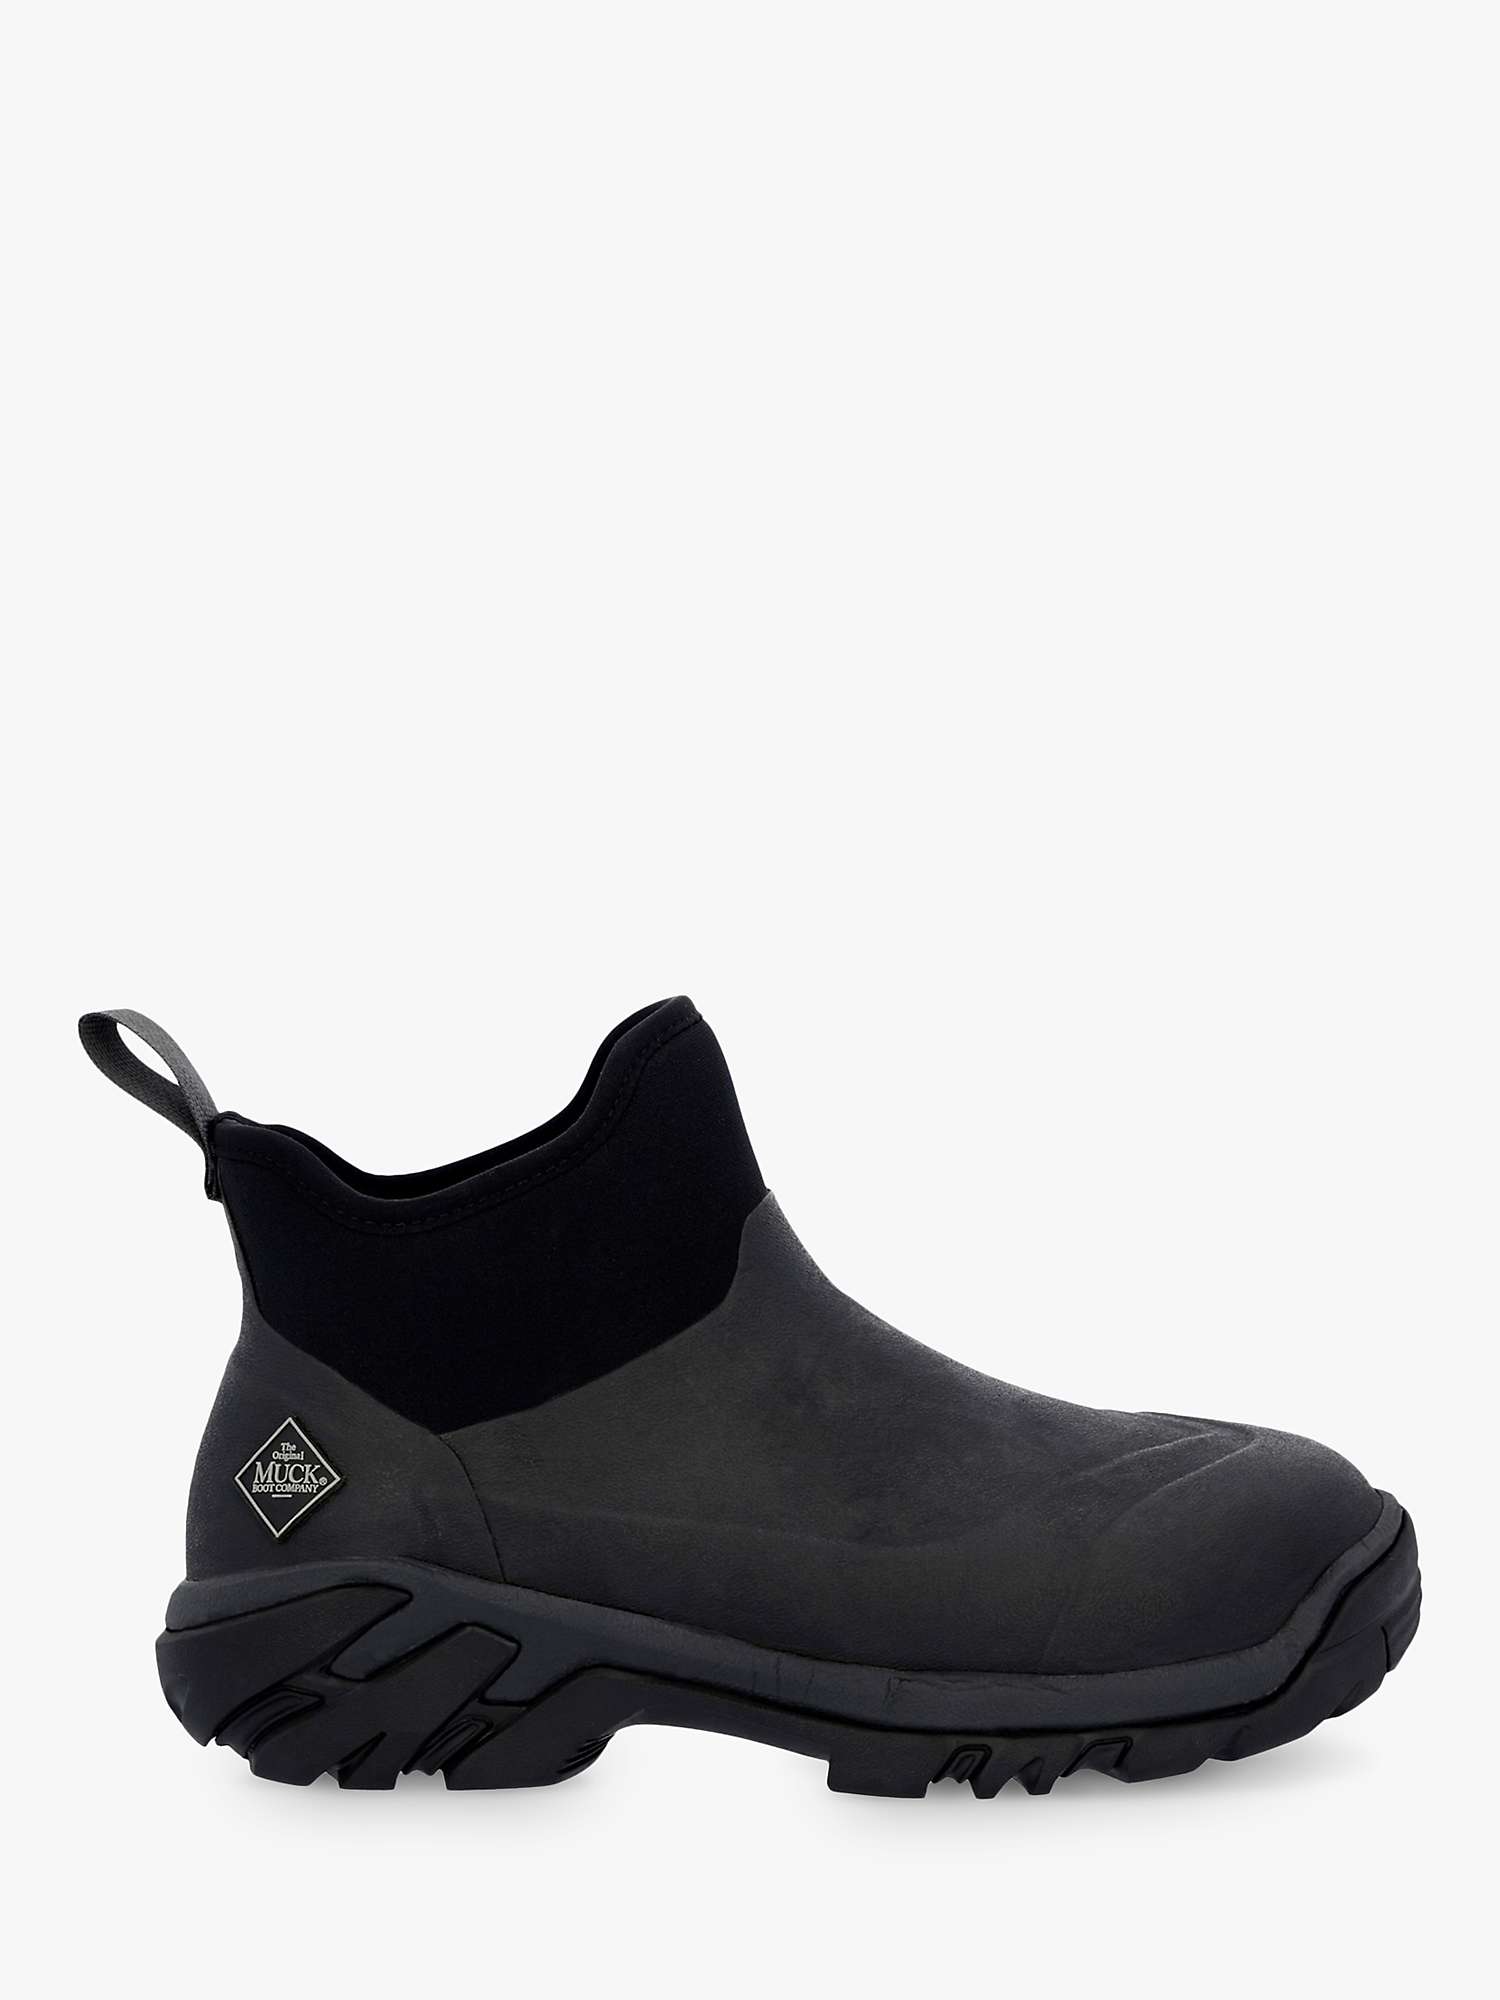 Buy Muck Woody Sport Rubber Boots Online at johnlewis.com